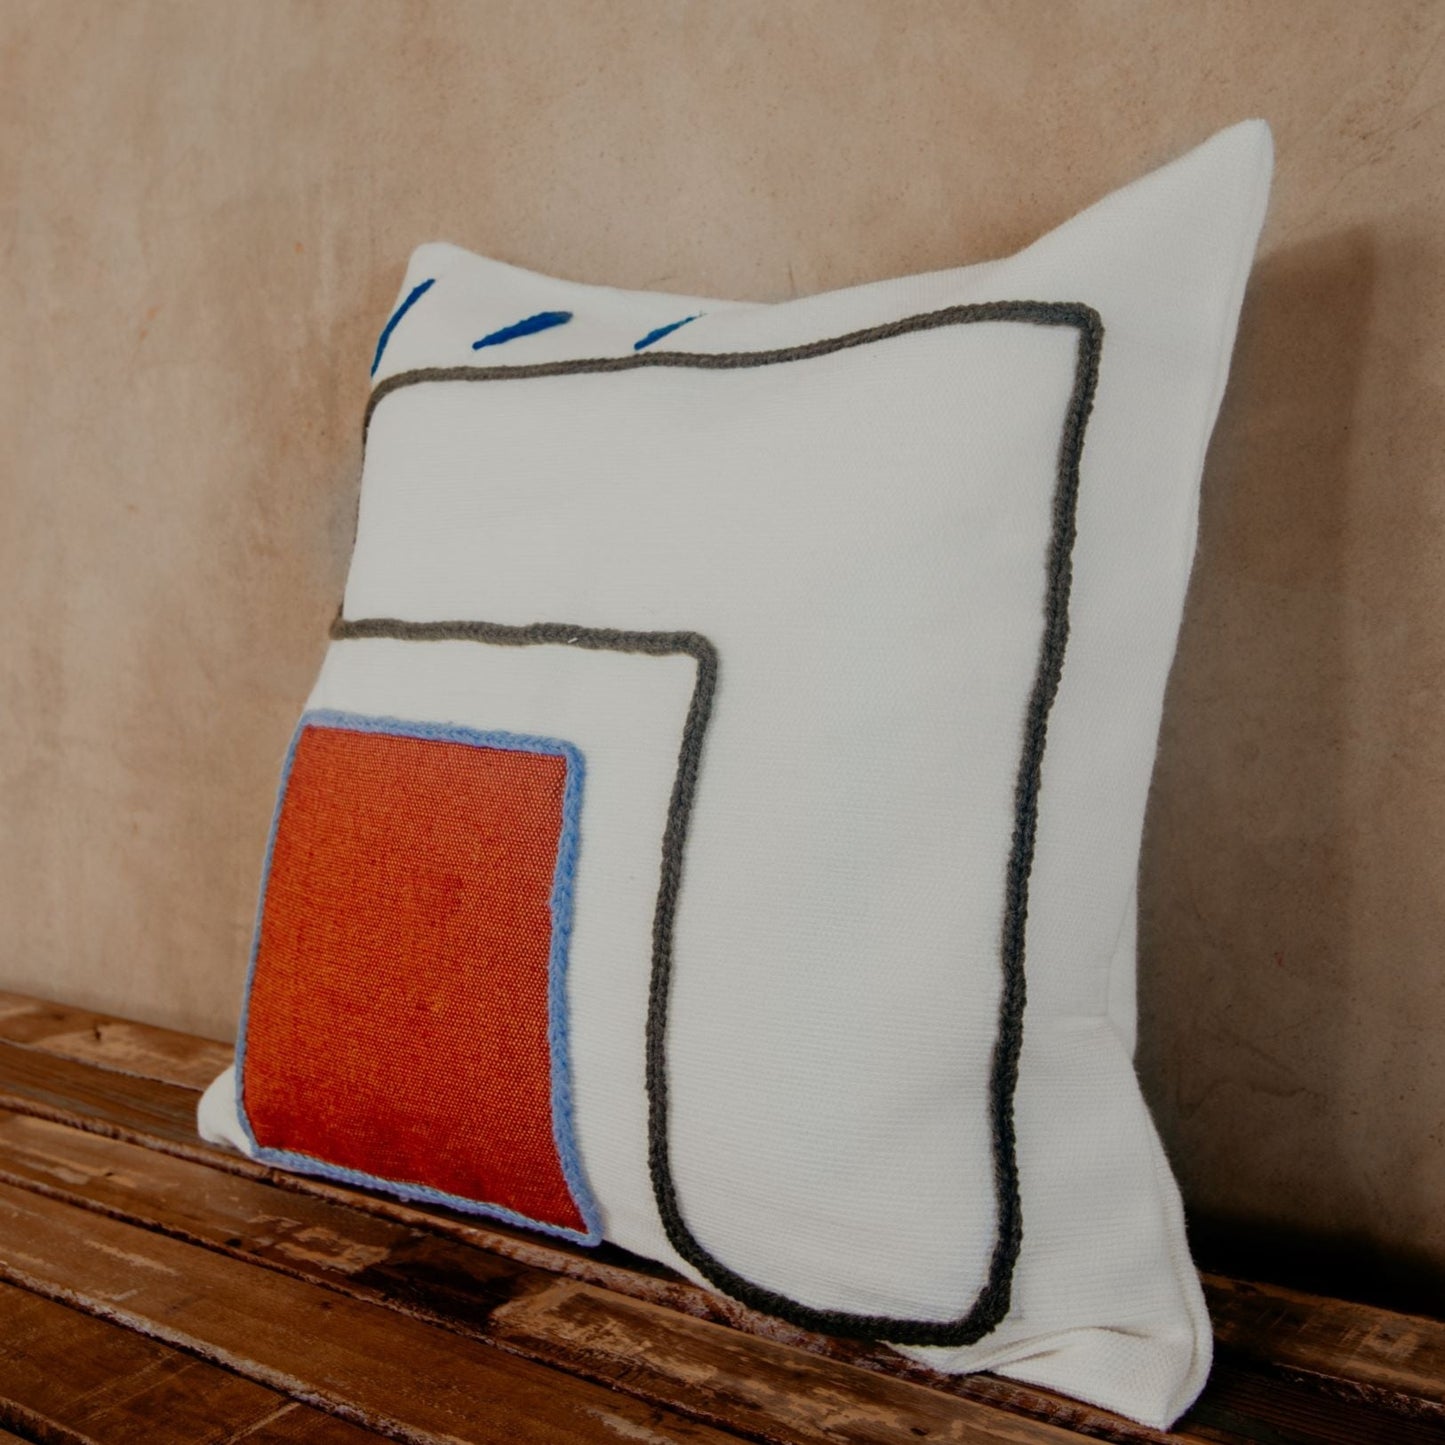 Asymmetric and colourful wool designs float across the ivory space of this beautiful pillow. Hand-loomed by expert artisans, the different shapes embroidered in wool bring an artsy look and extra coziness to your bed, sofa or chaise.